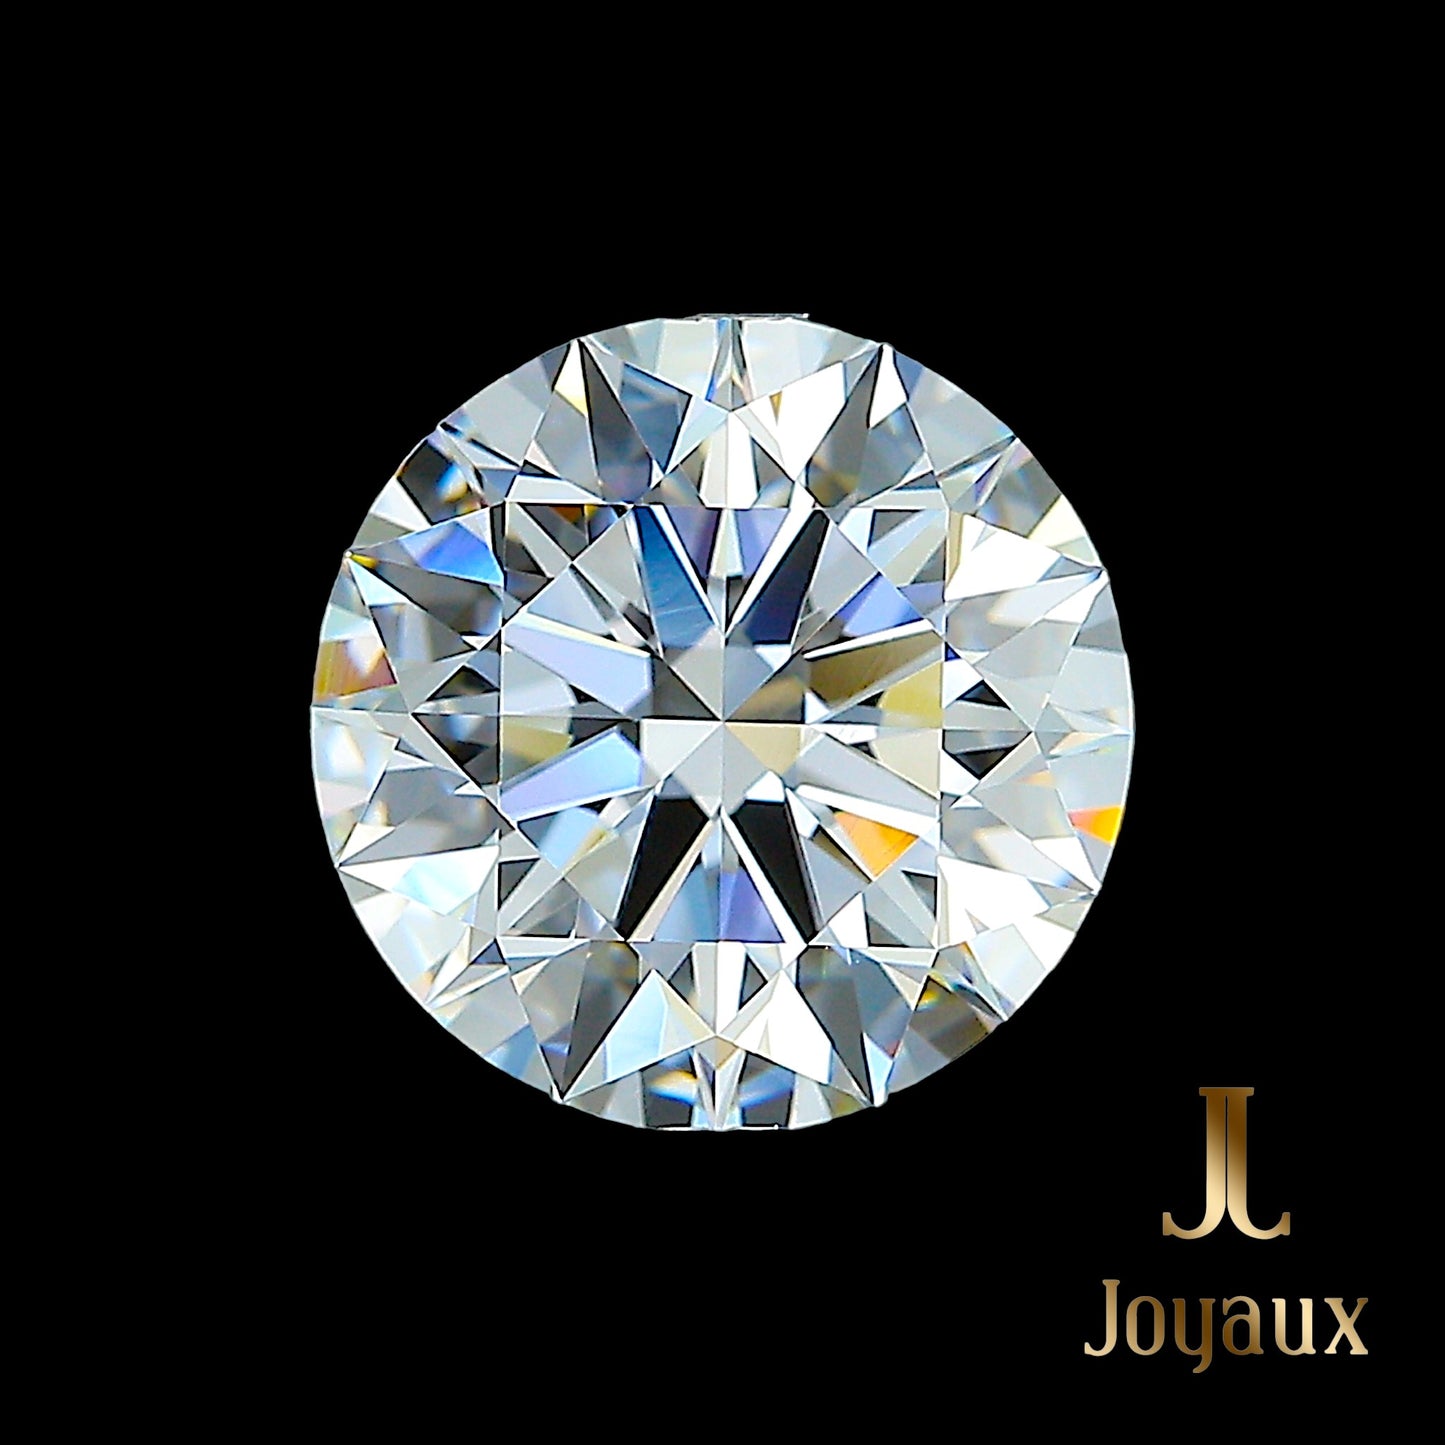 Explore the exceptional 2.56ct Joyaux™ Hearts & Arrows Diamond at Atelier de Joyaux™ Geneva. This E color, internally flawless diamond offers unparalleled brilliance and rarity, making it a premier investment. Available upon special request.